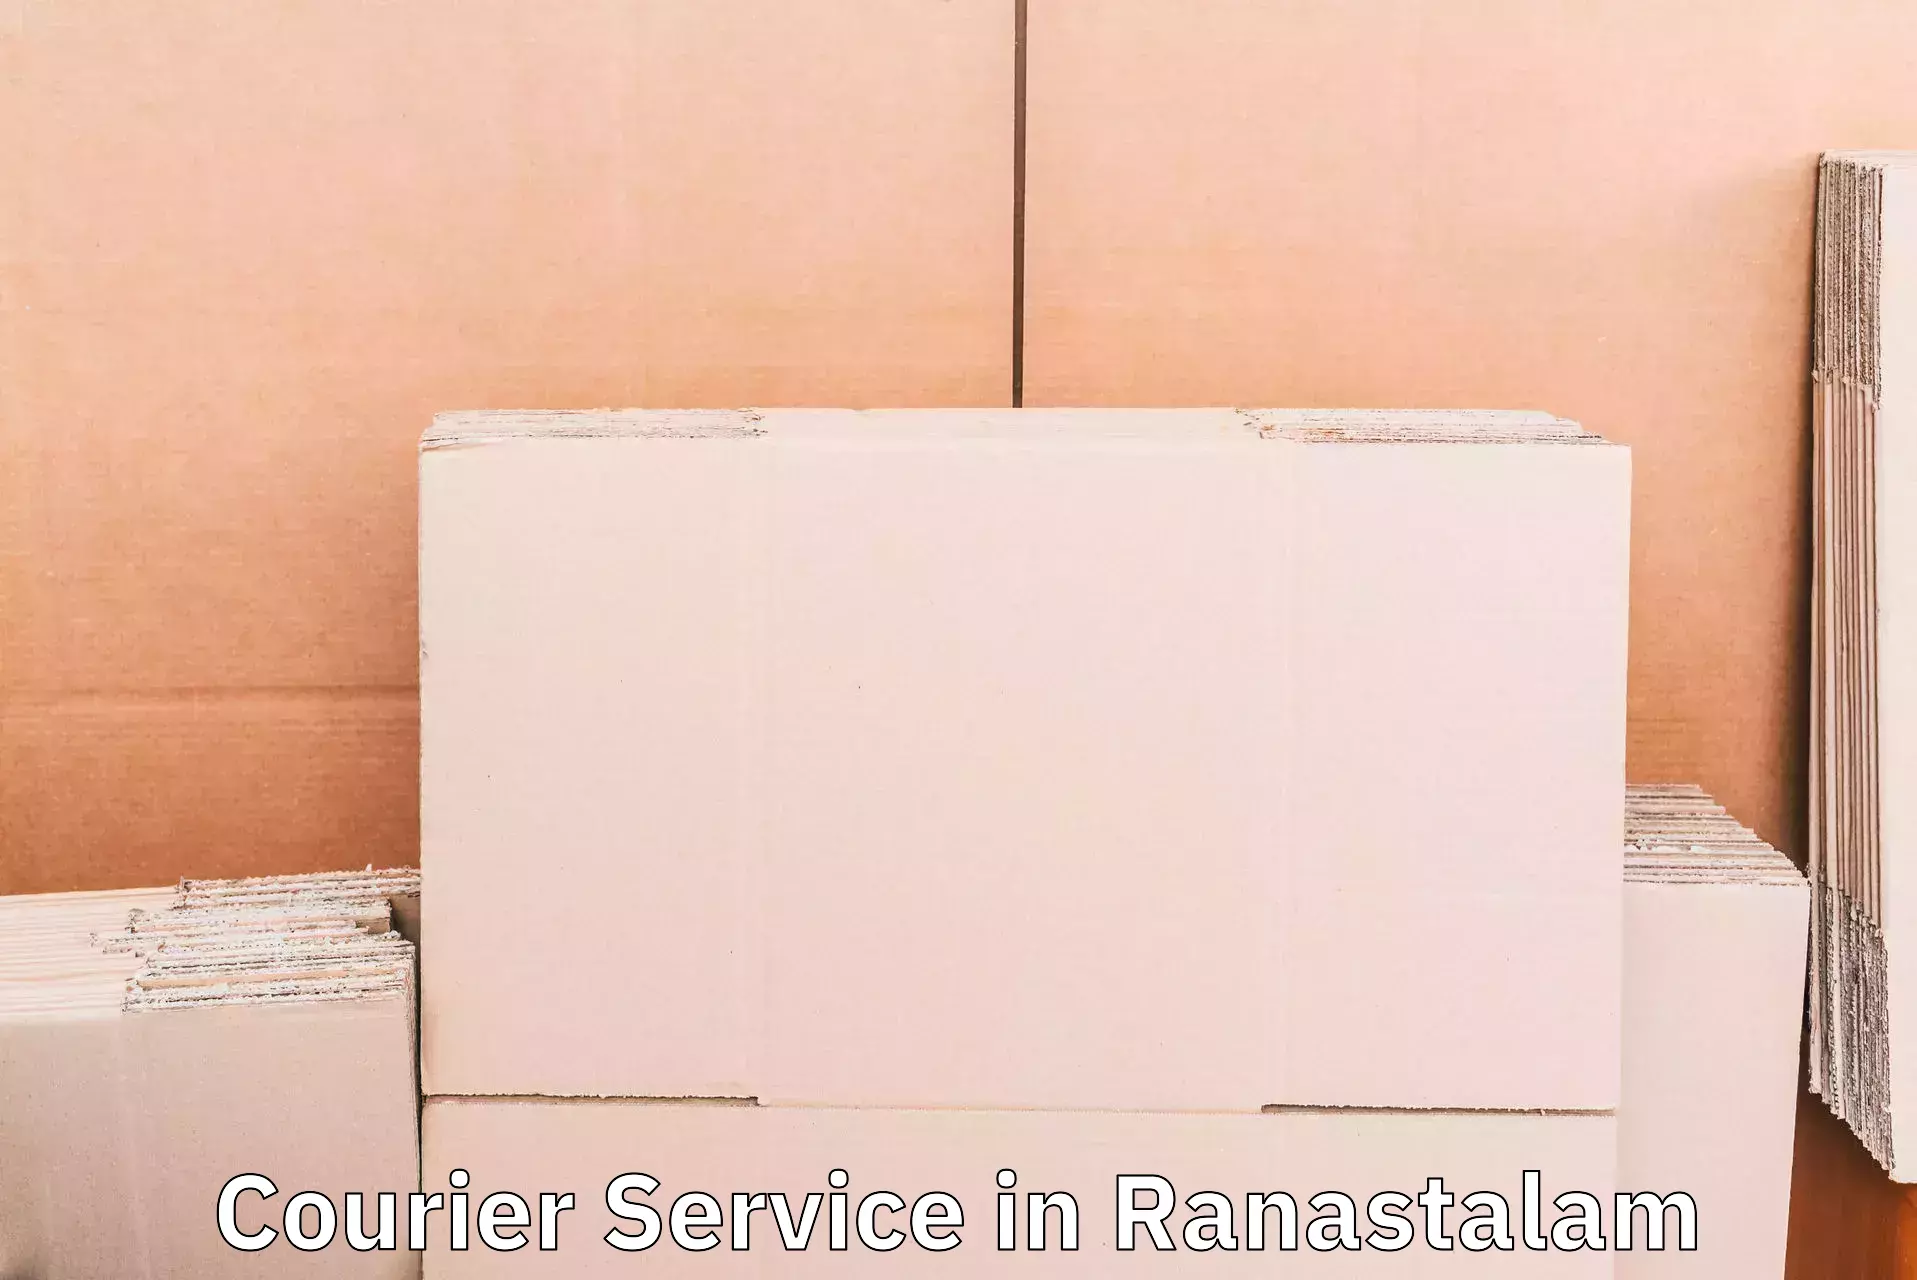 Cost-effective courier options in Ranastalam